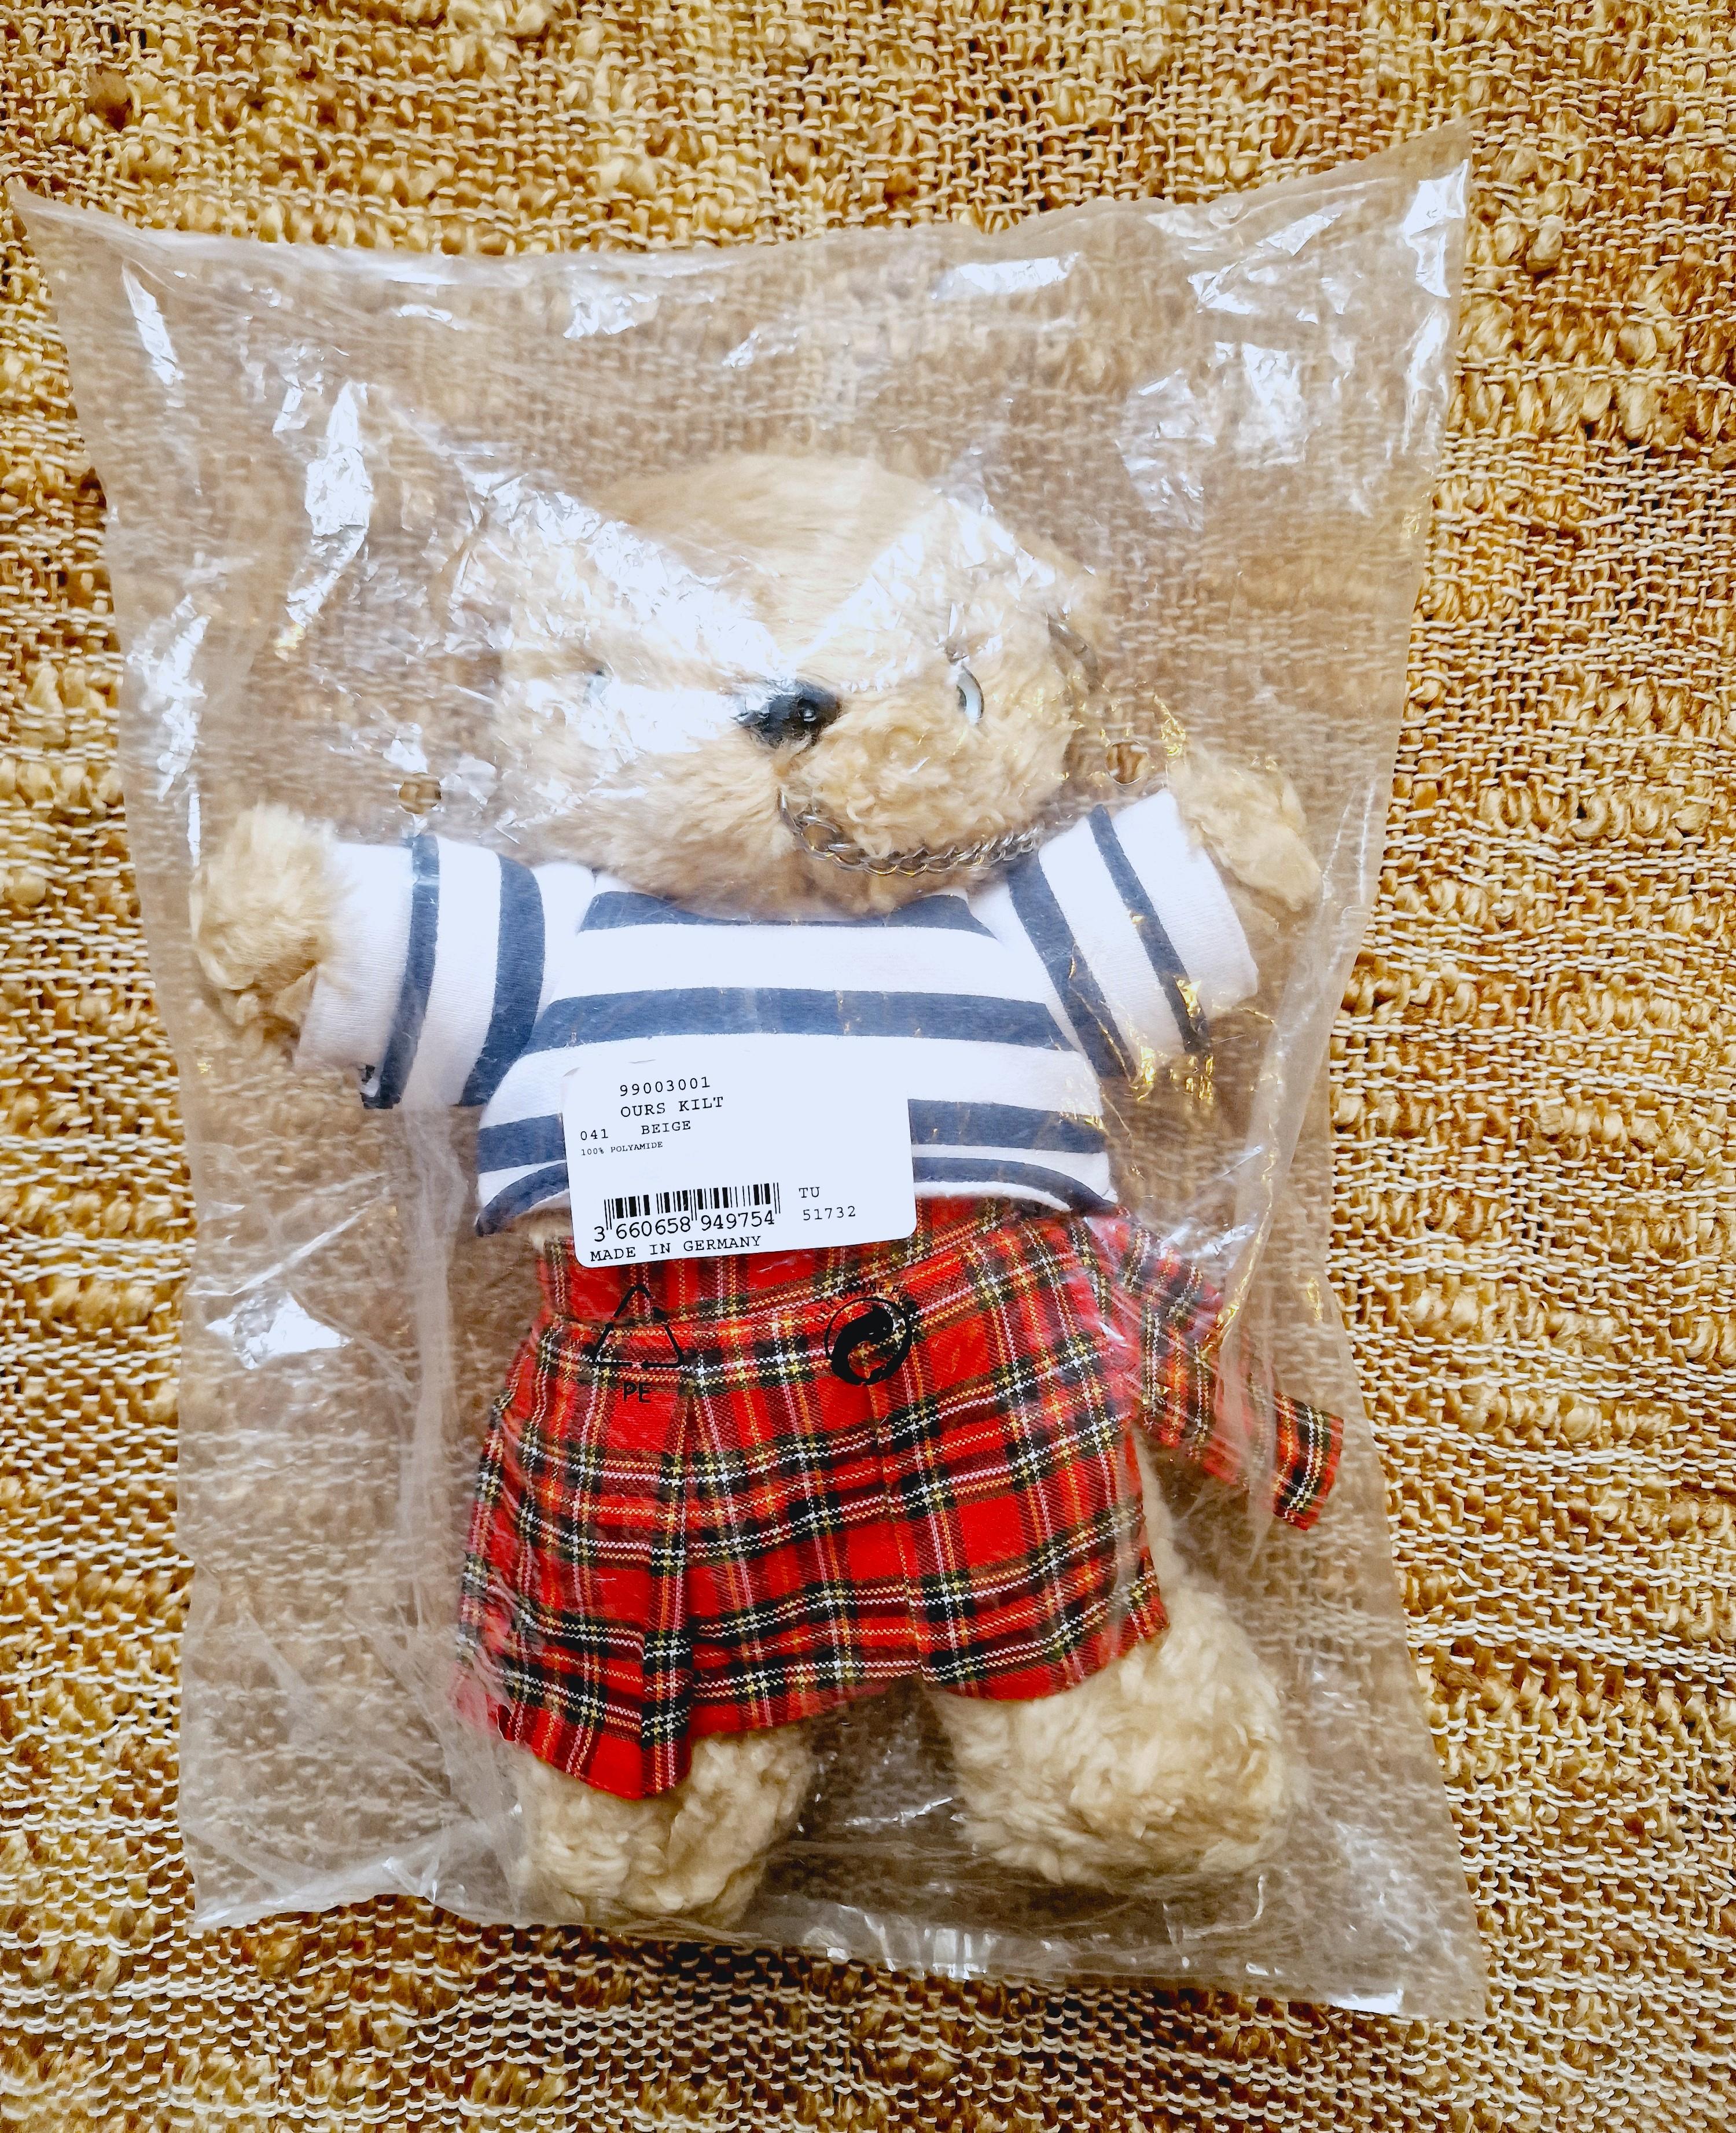 Jean Paul Gaultier Punk Rock New Soft Stuffed Toy Plush Sailor Marine Teddy Bear In New Condition For Sale In PARIS, FR